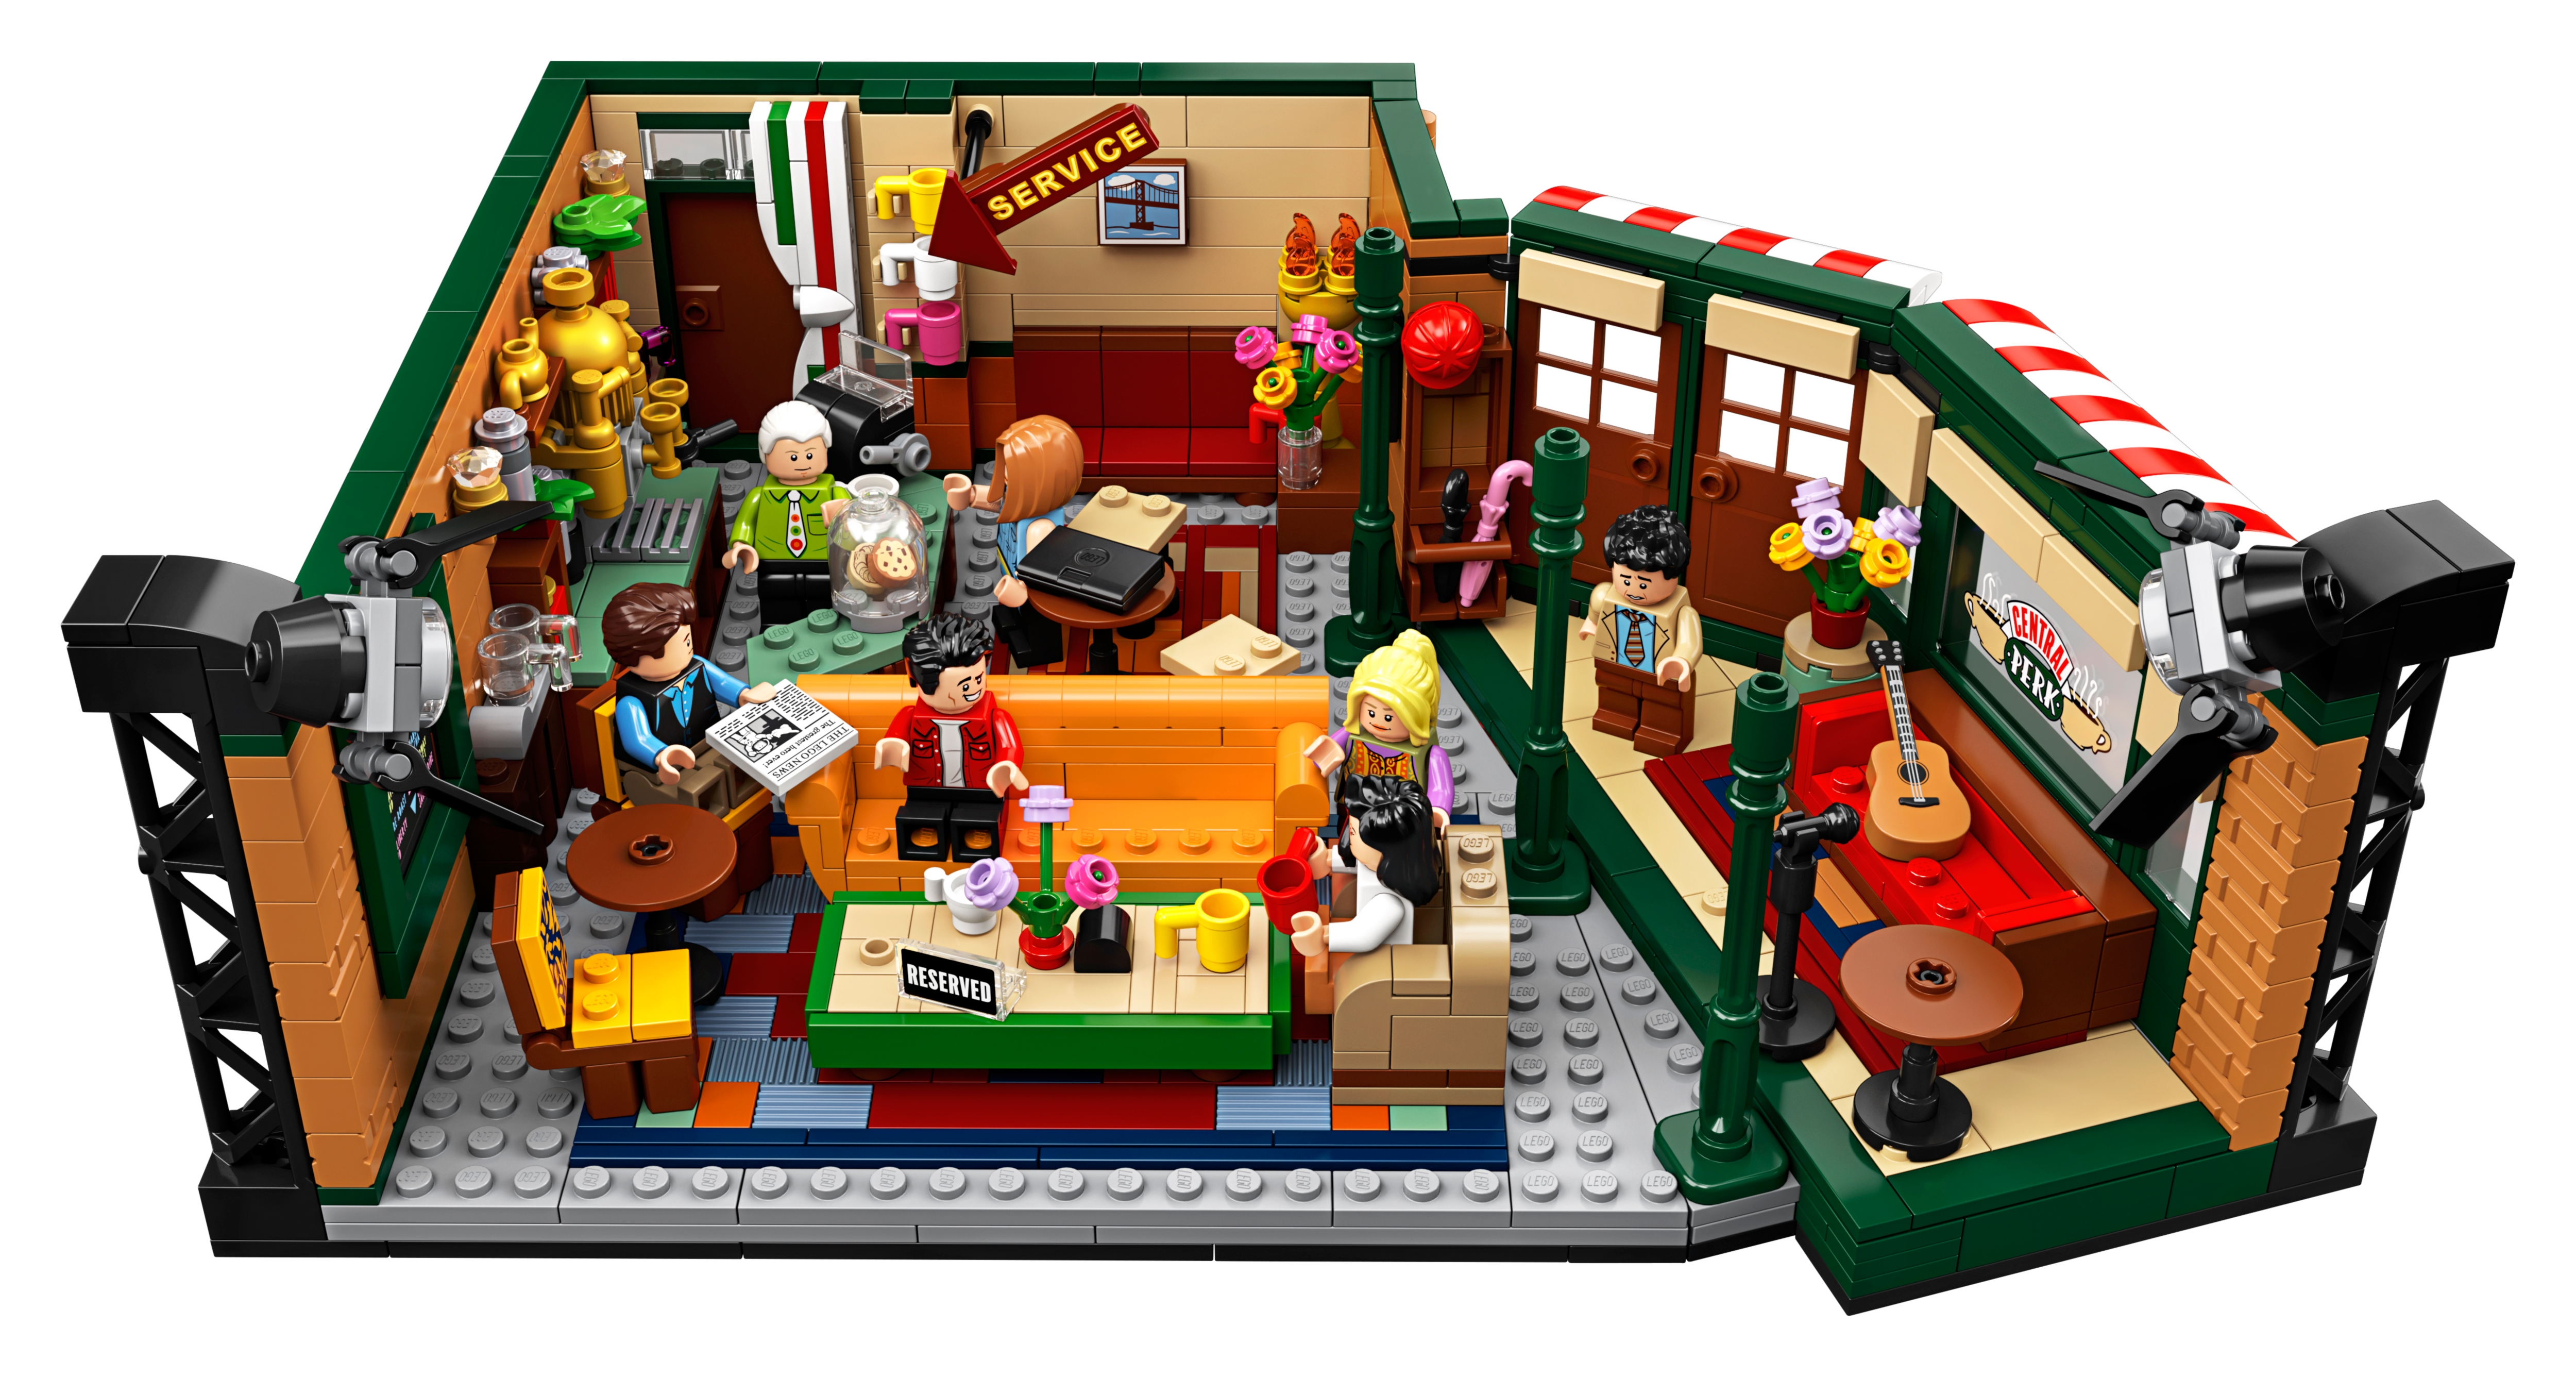 21319 for sale online LEGO Ideas Central Perk